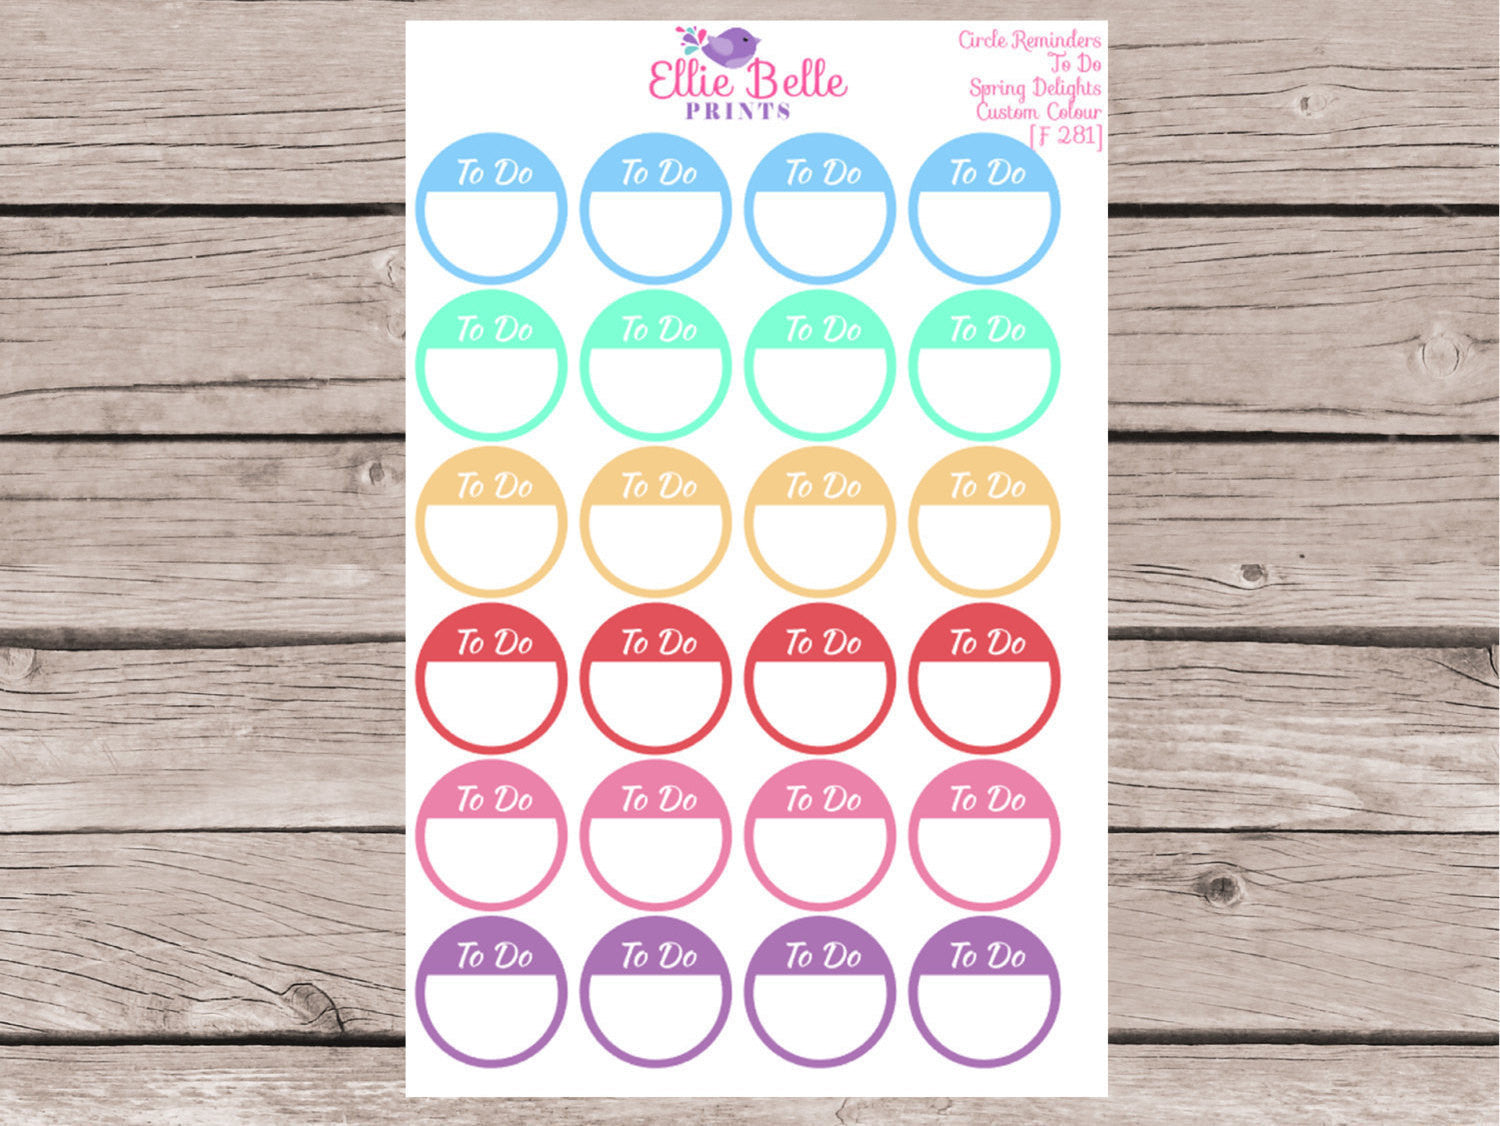 To do Circle Reminder Stickers - Spring Delights [281]